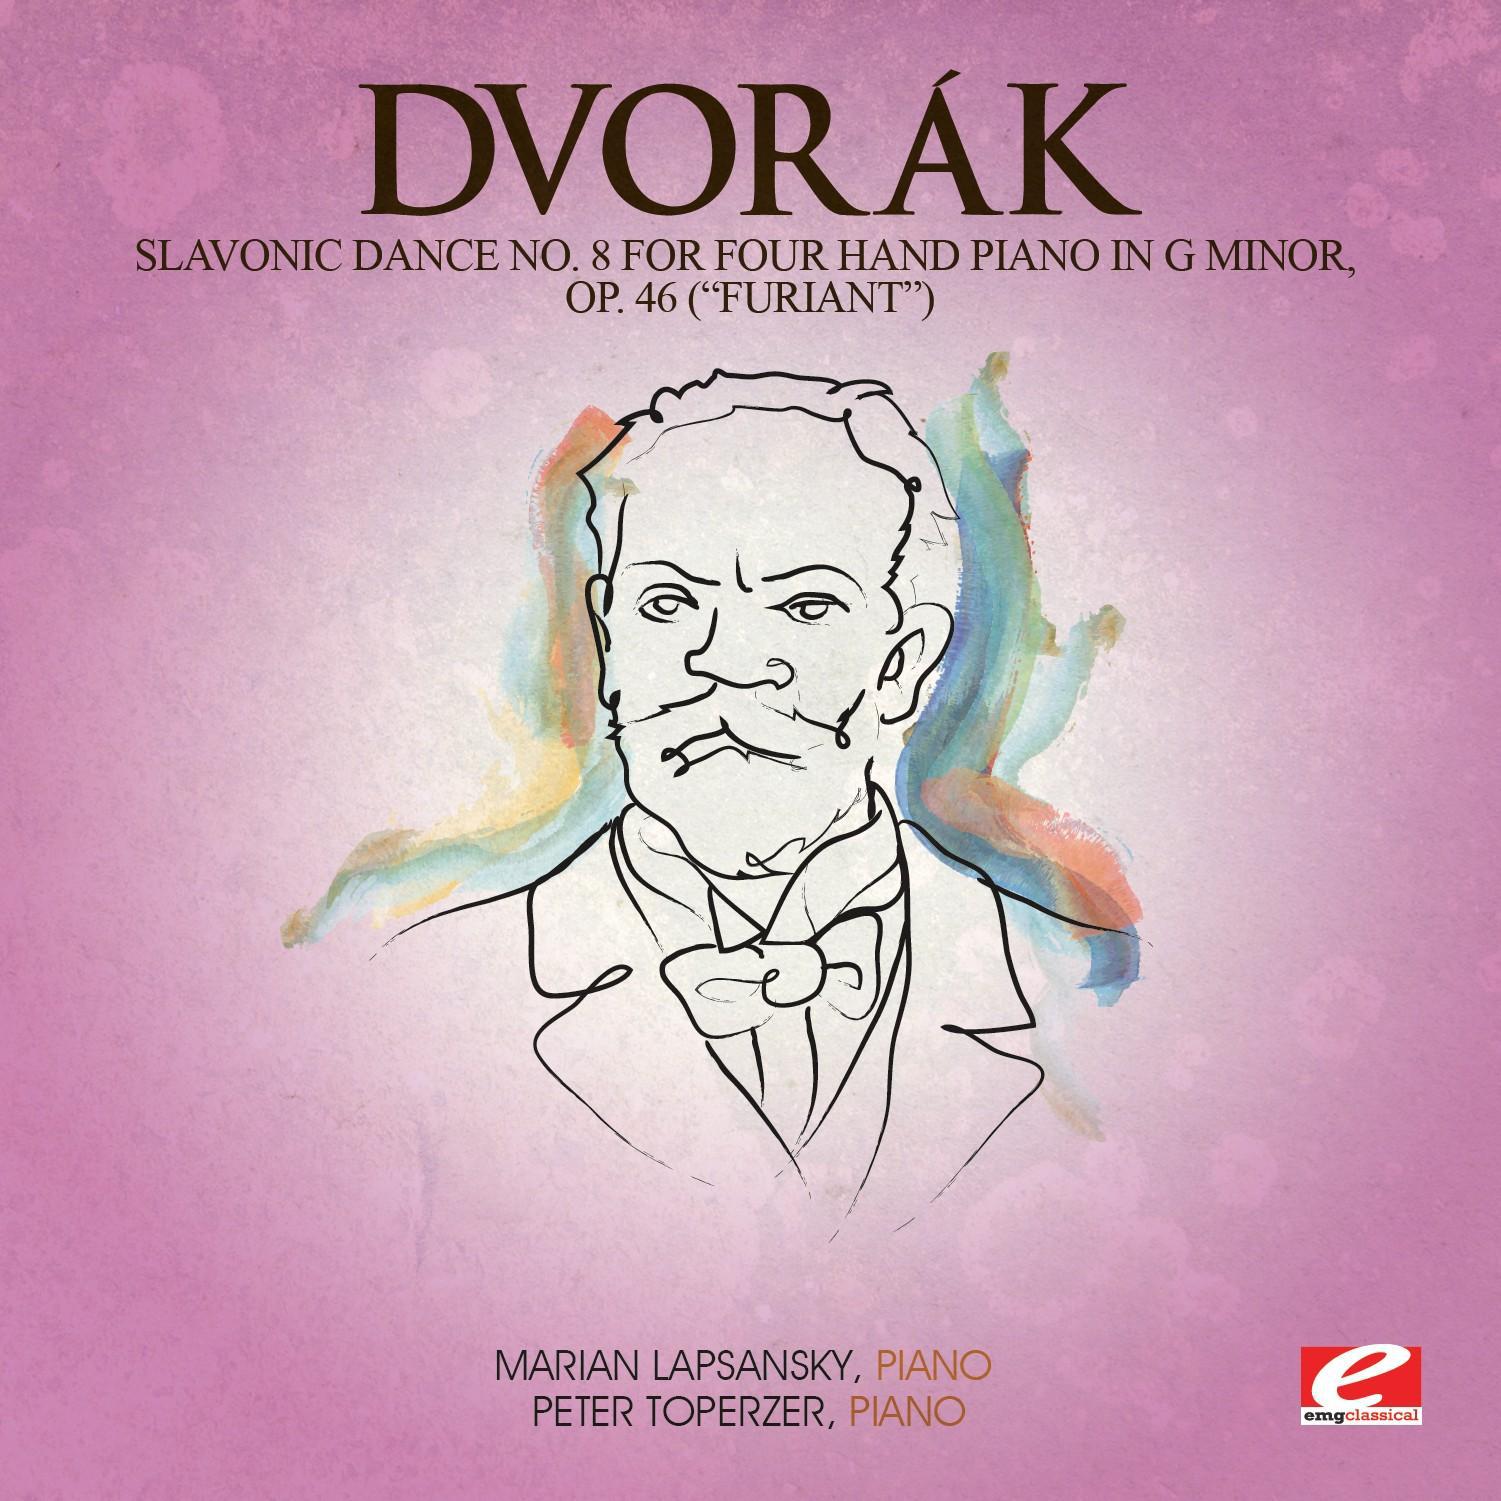 Dvora k: Slavonic Dance No. 8 for Four Hand Piano in G Minor, Op. 46 Furiant Digitally Remastered